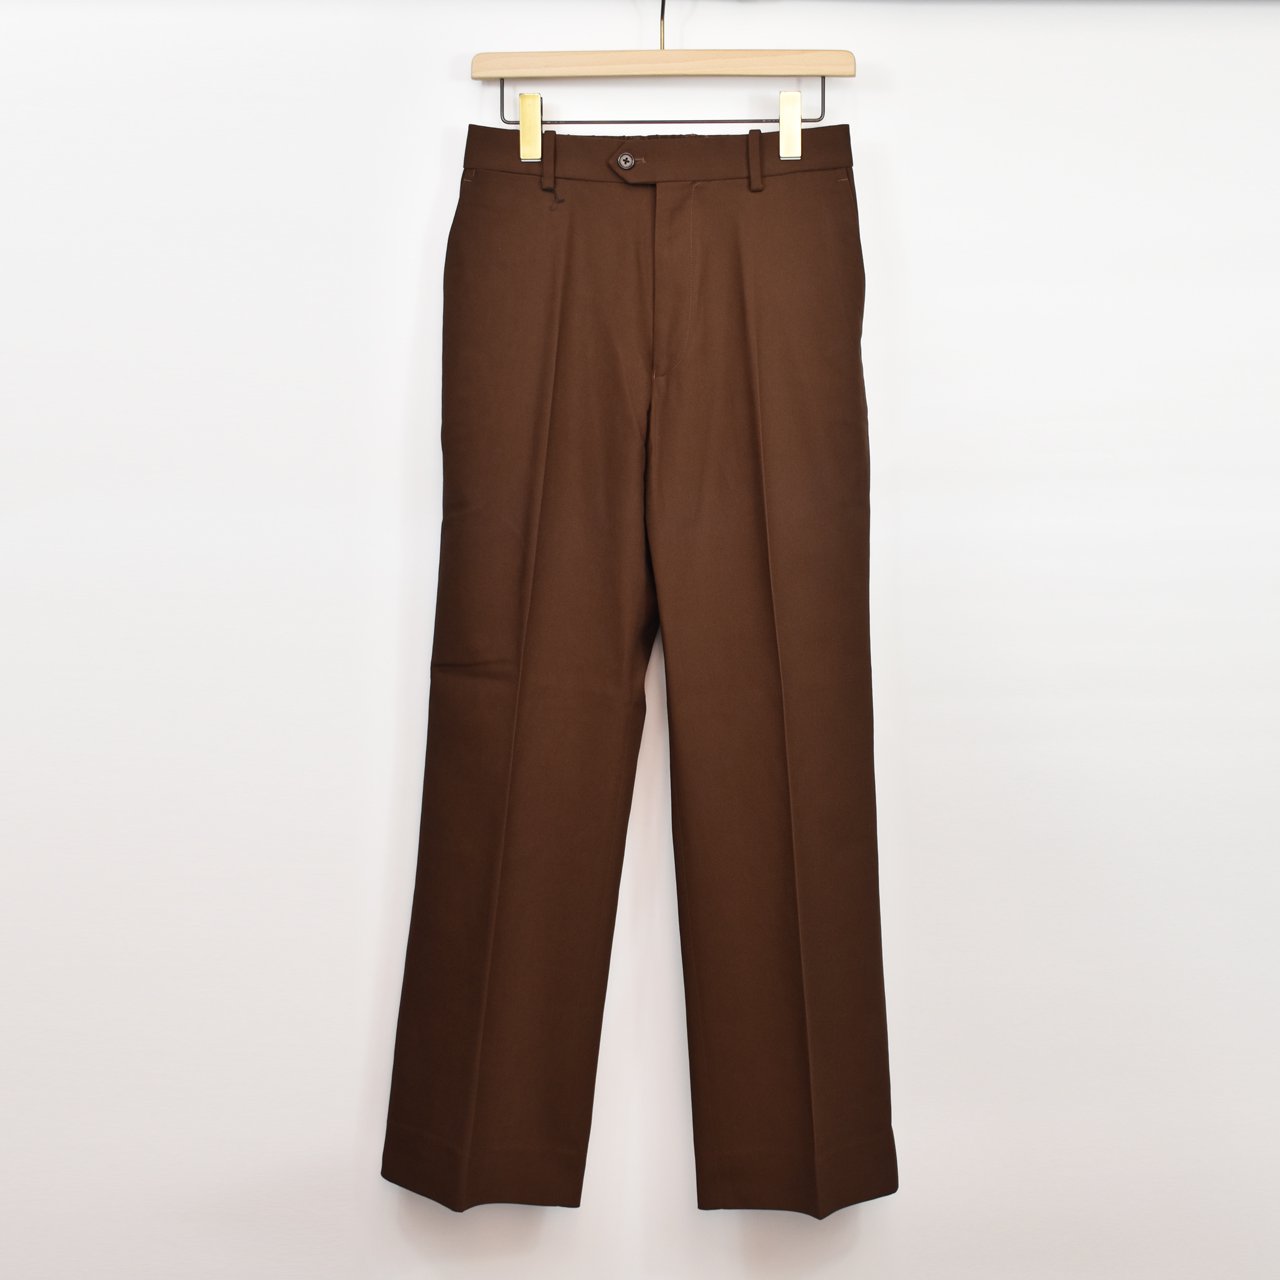 MARKAWARE (マーカウェア) 24SS/春夏
FLAT FRONT FLARED TROUSERS BROWN 
-ORGANIC COTTON SURVIVAL CLOTH-
